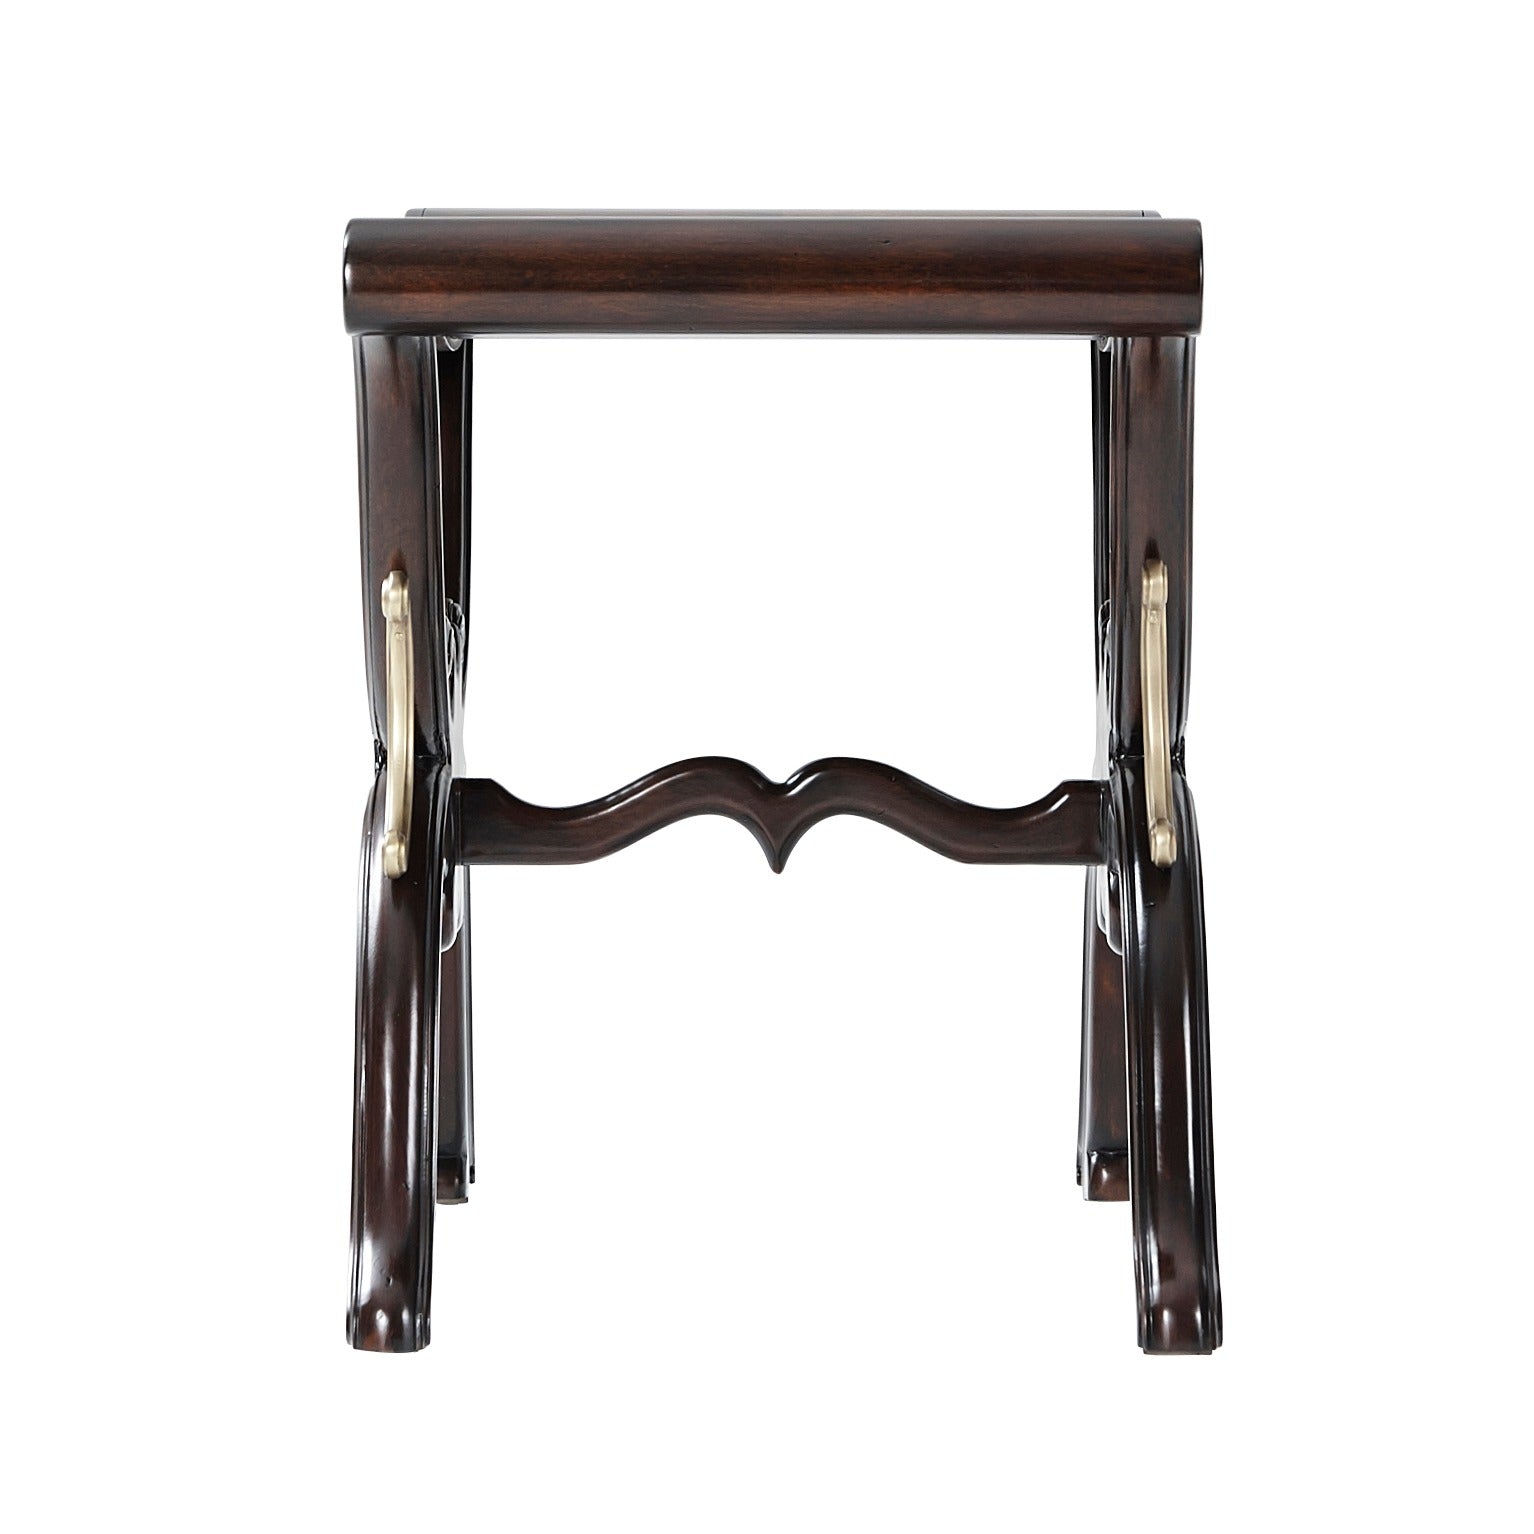 The Gillows Stool